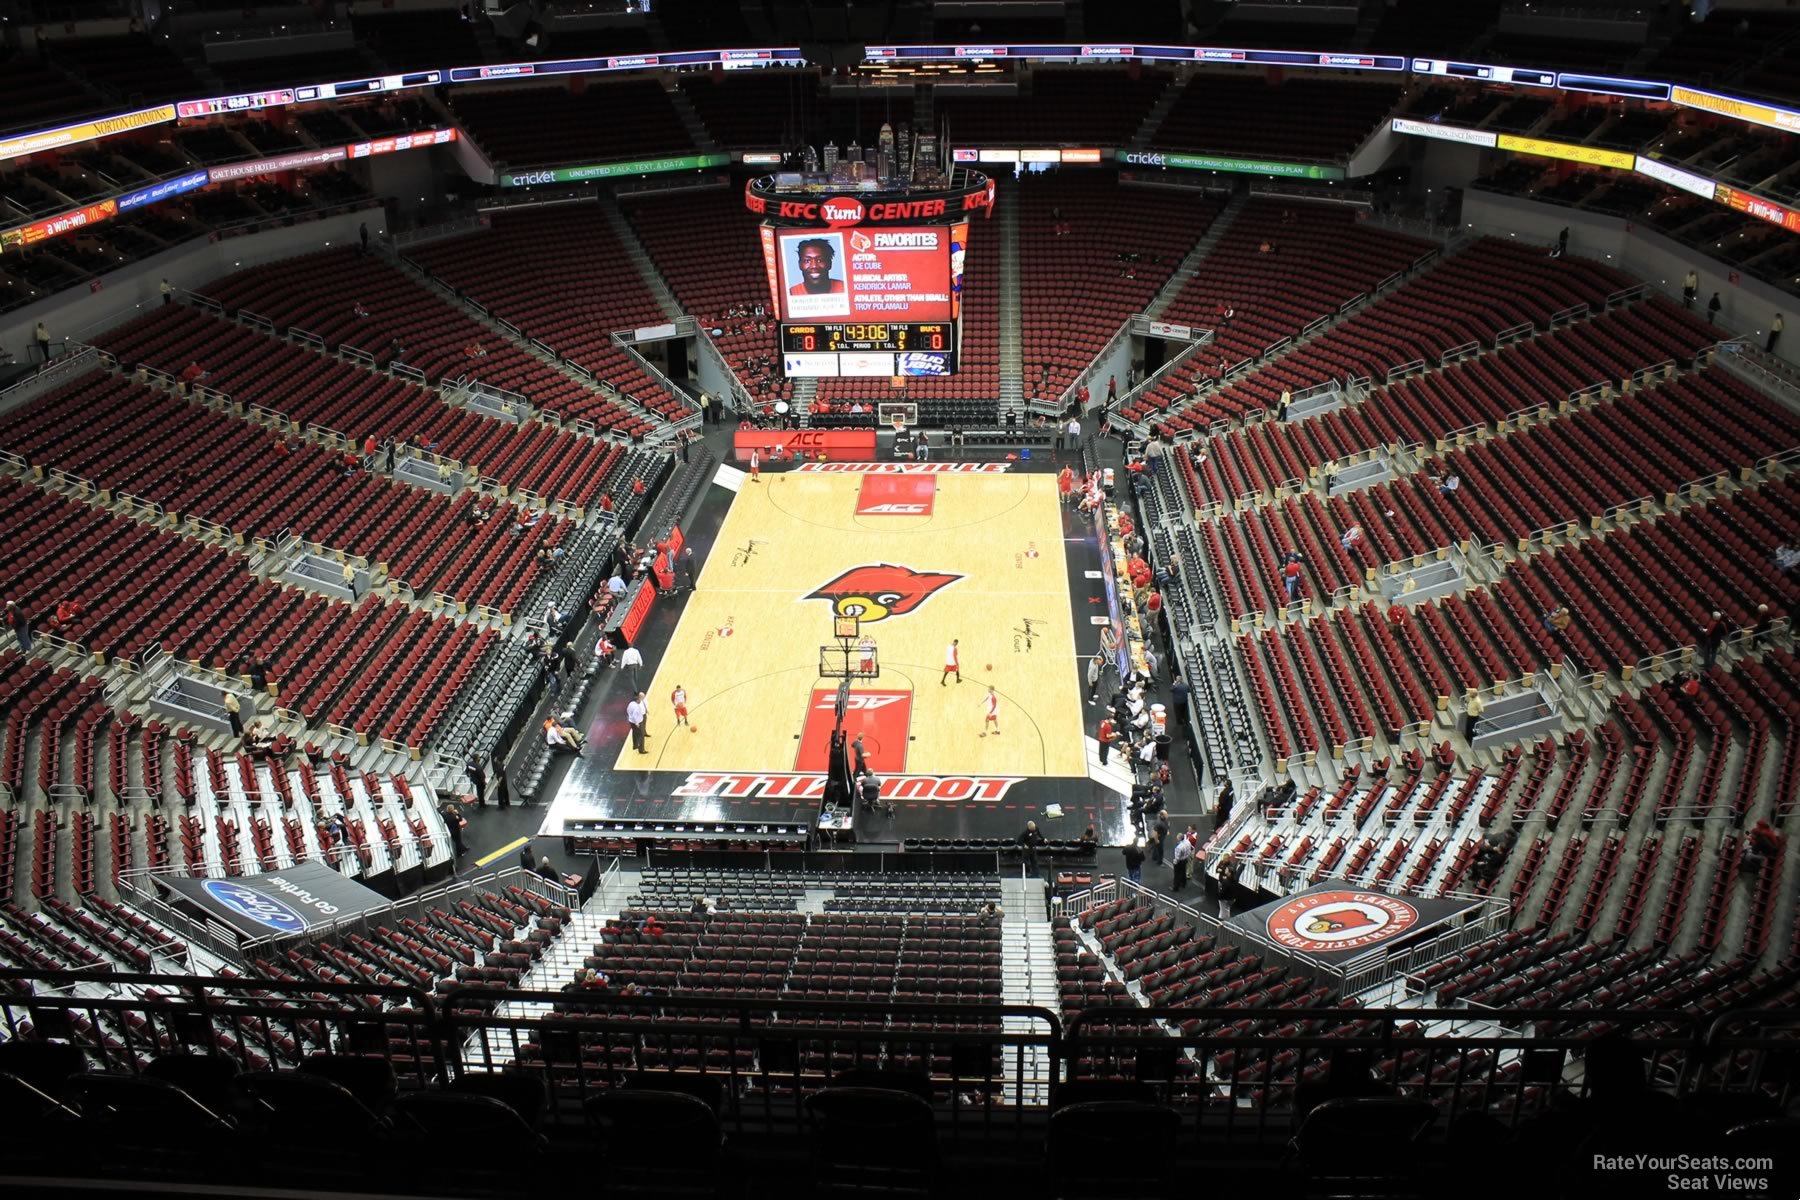 Kfc Yum Center Seating Chart With Rows And Seat Numbers Elcho Table